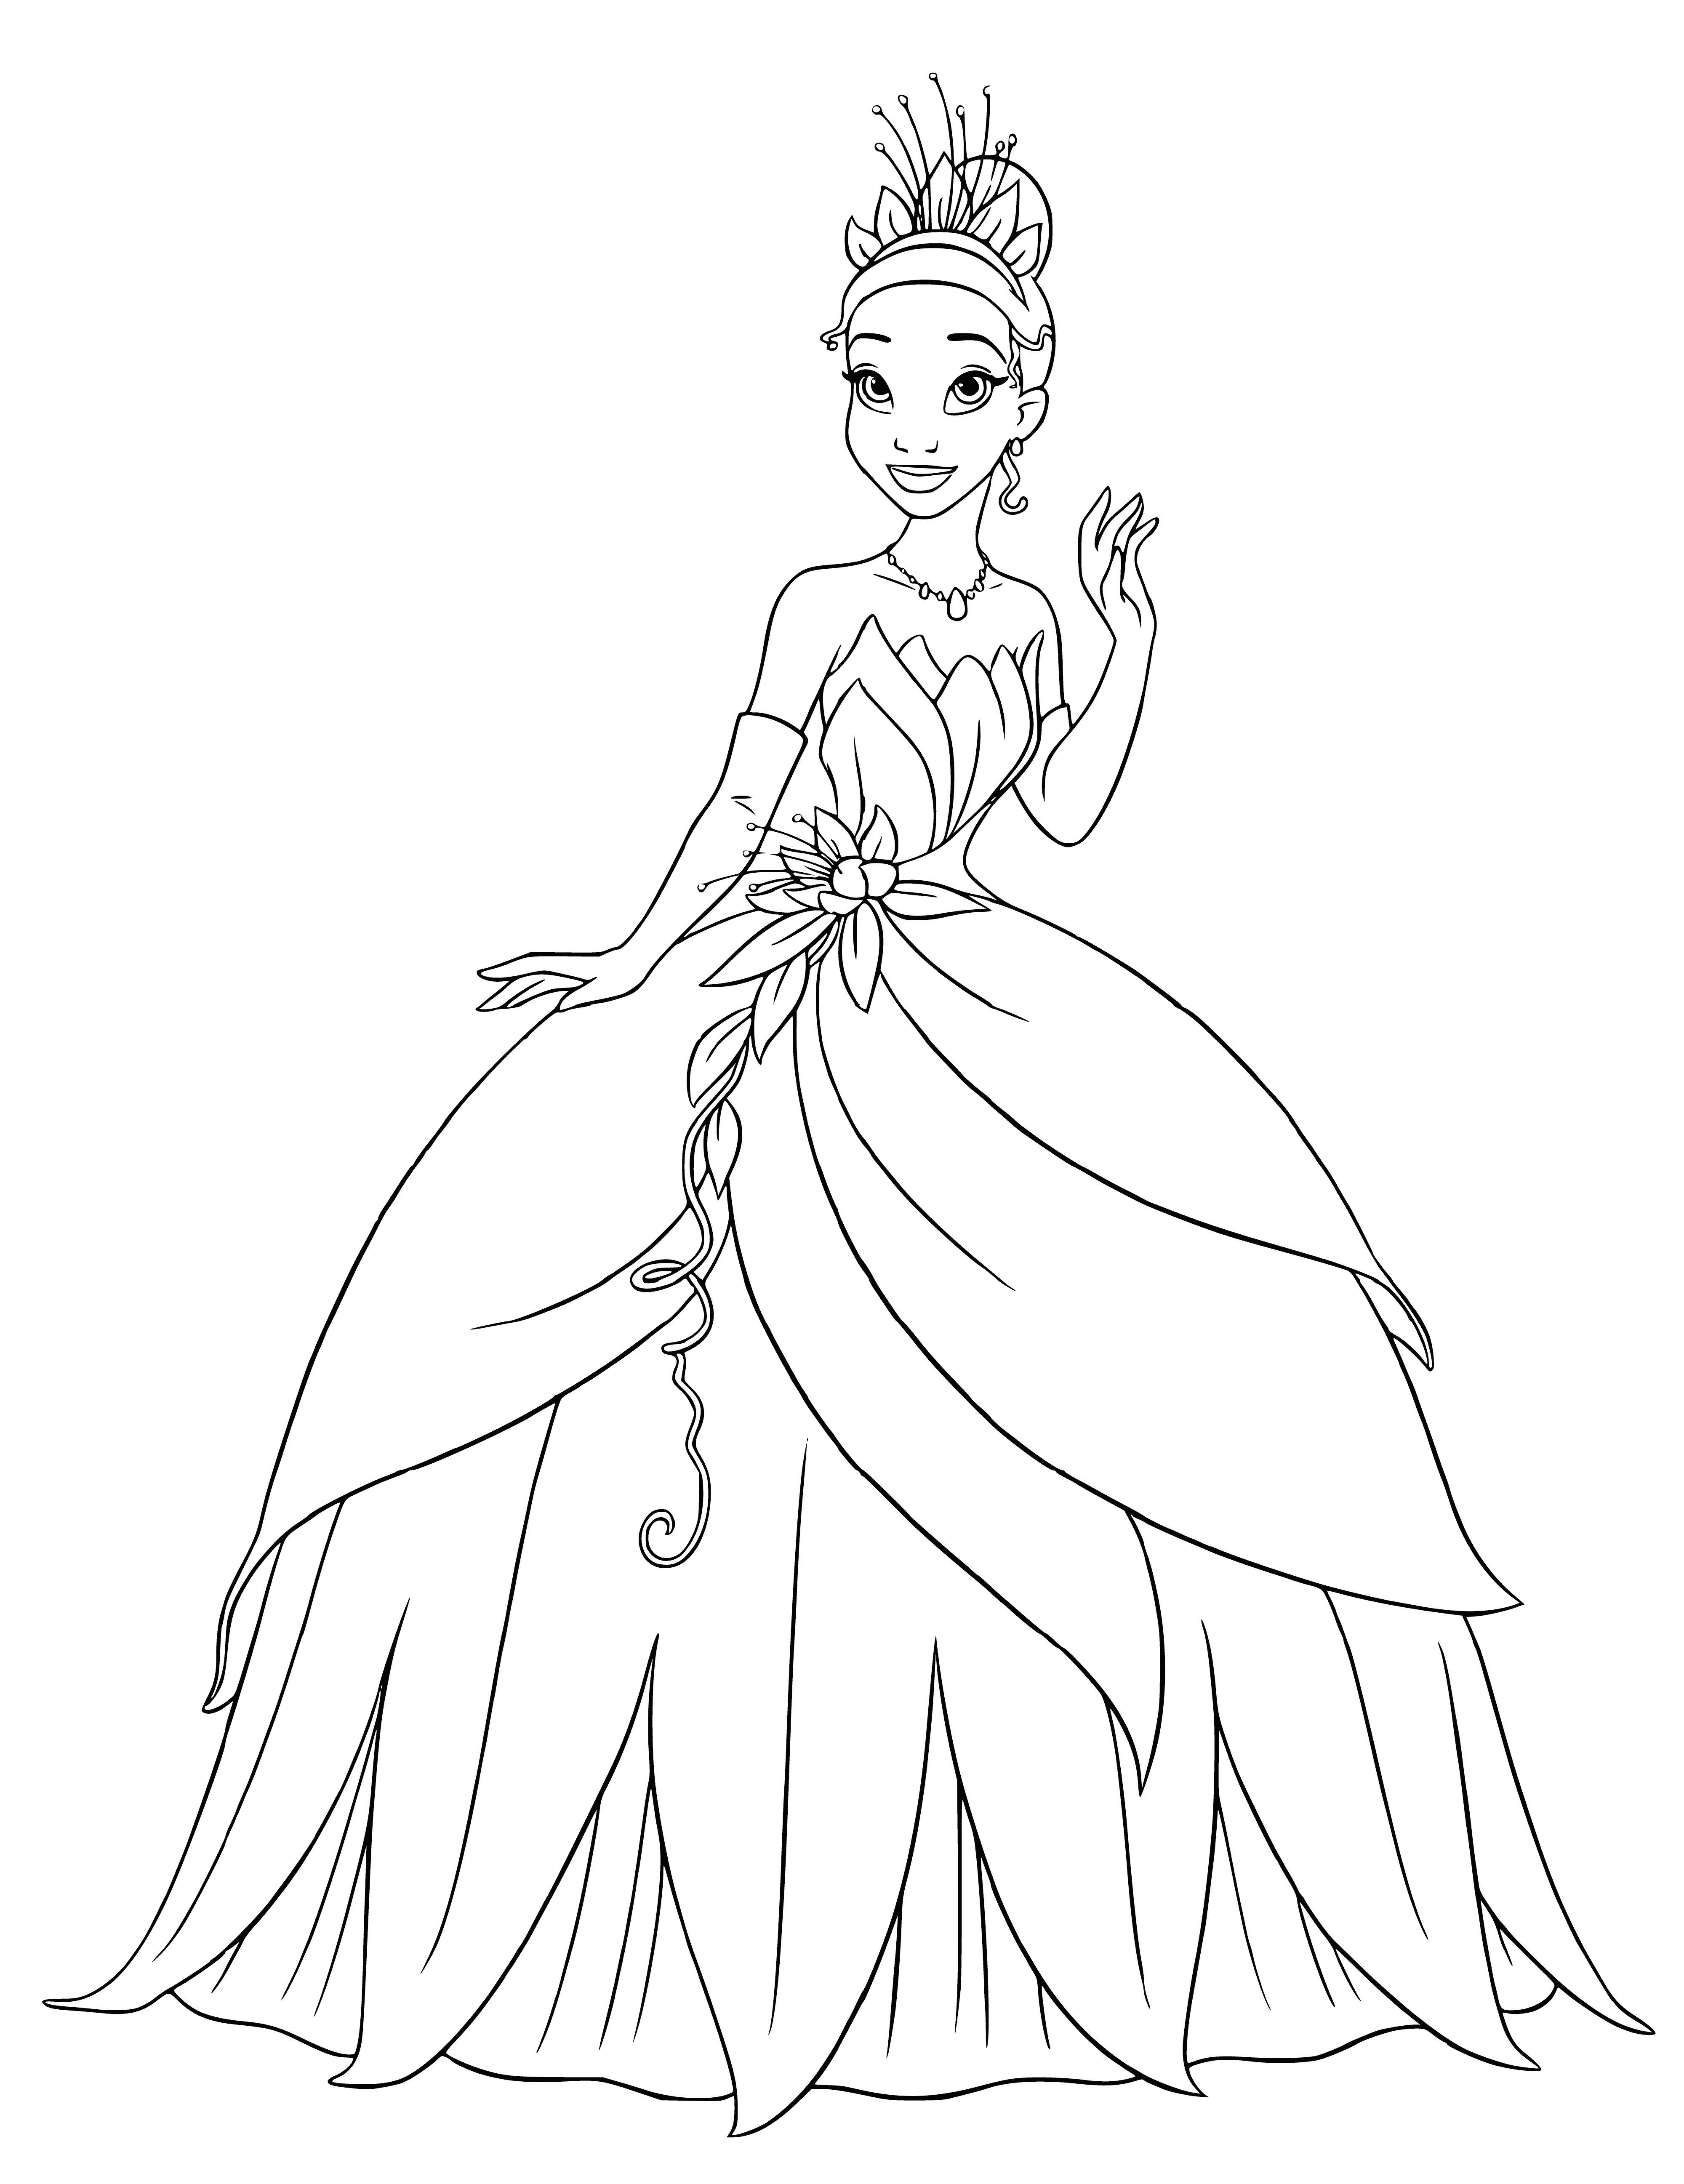 coloring page: Princess Tiana smiles, in a light green dress with a ruffled bottom, dark brown hair pulled back, light brown skin. She stands in a field of tall grass, looking off to the side.